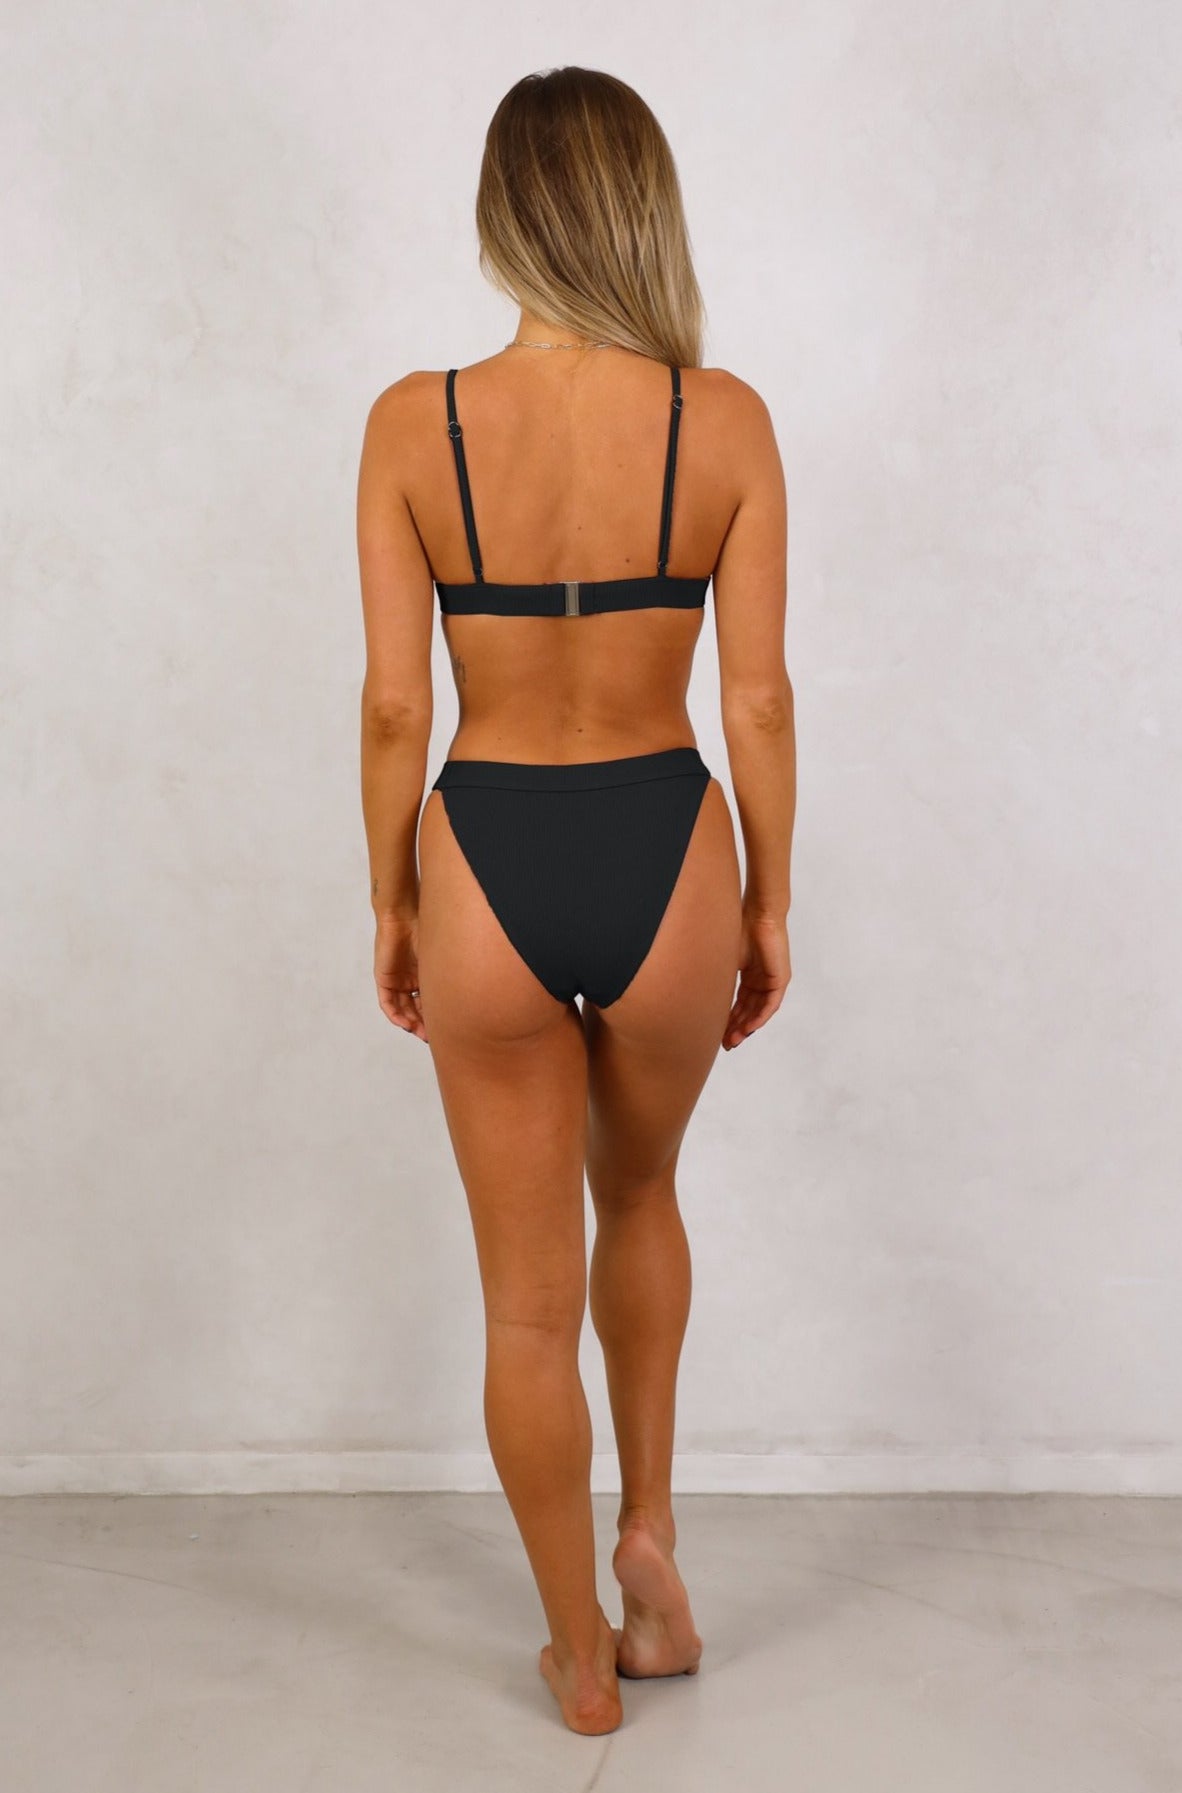 The Ariana ribbed two piece bikini set are known for their durability and function with adjustable straps,removable padding and a secure back clasp attachment. Shop Women's Swimwear. Women's Bikinis and swimsuits. Ribbed Swimwear. Free Shipping on Australian Orders over $100. Free Shipping to New Zealand on orders over $180. Afterpay Available. Shipping Worldwide.